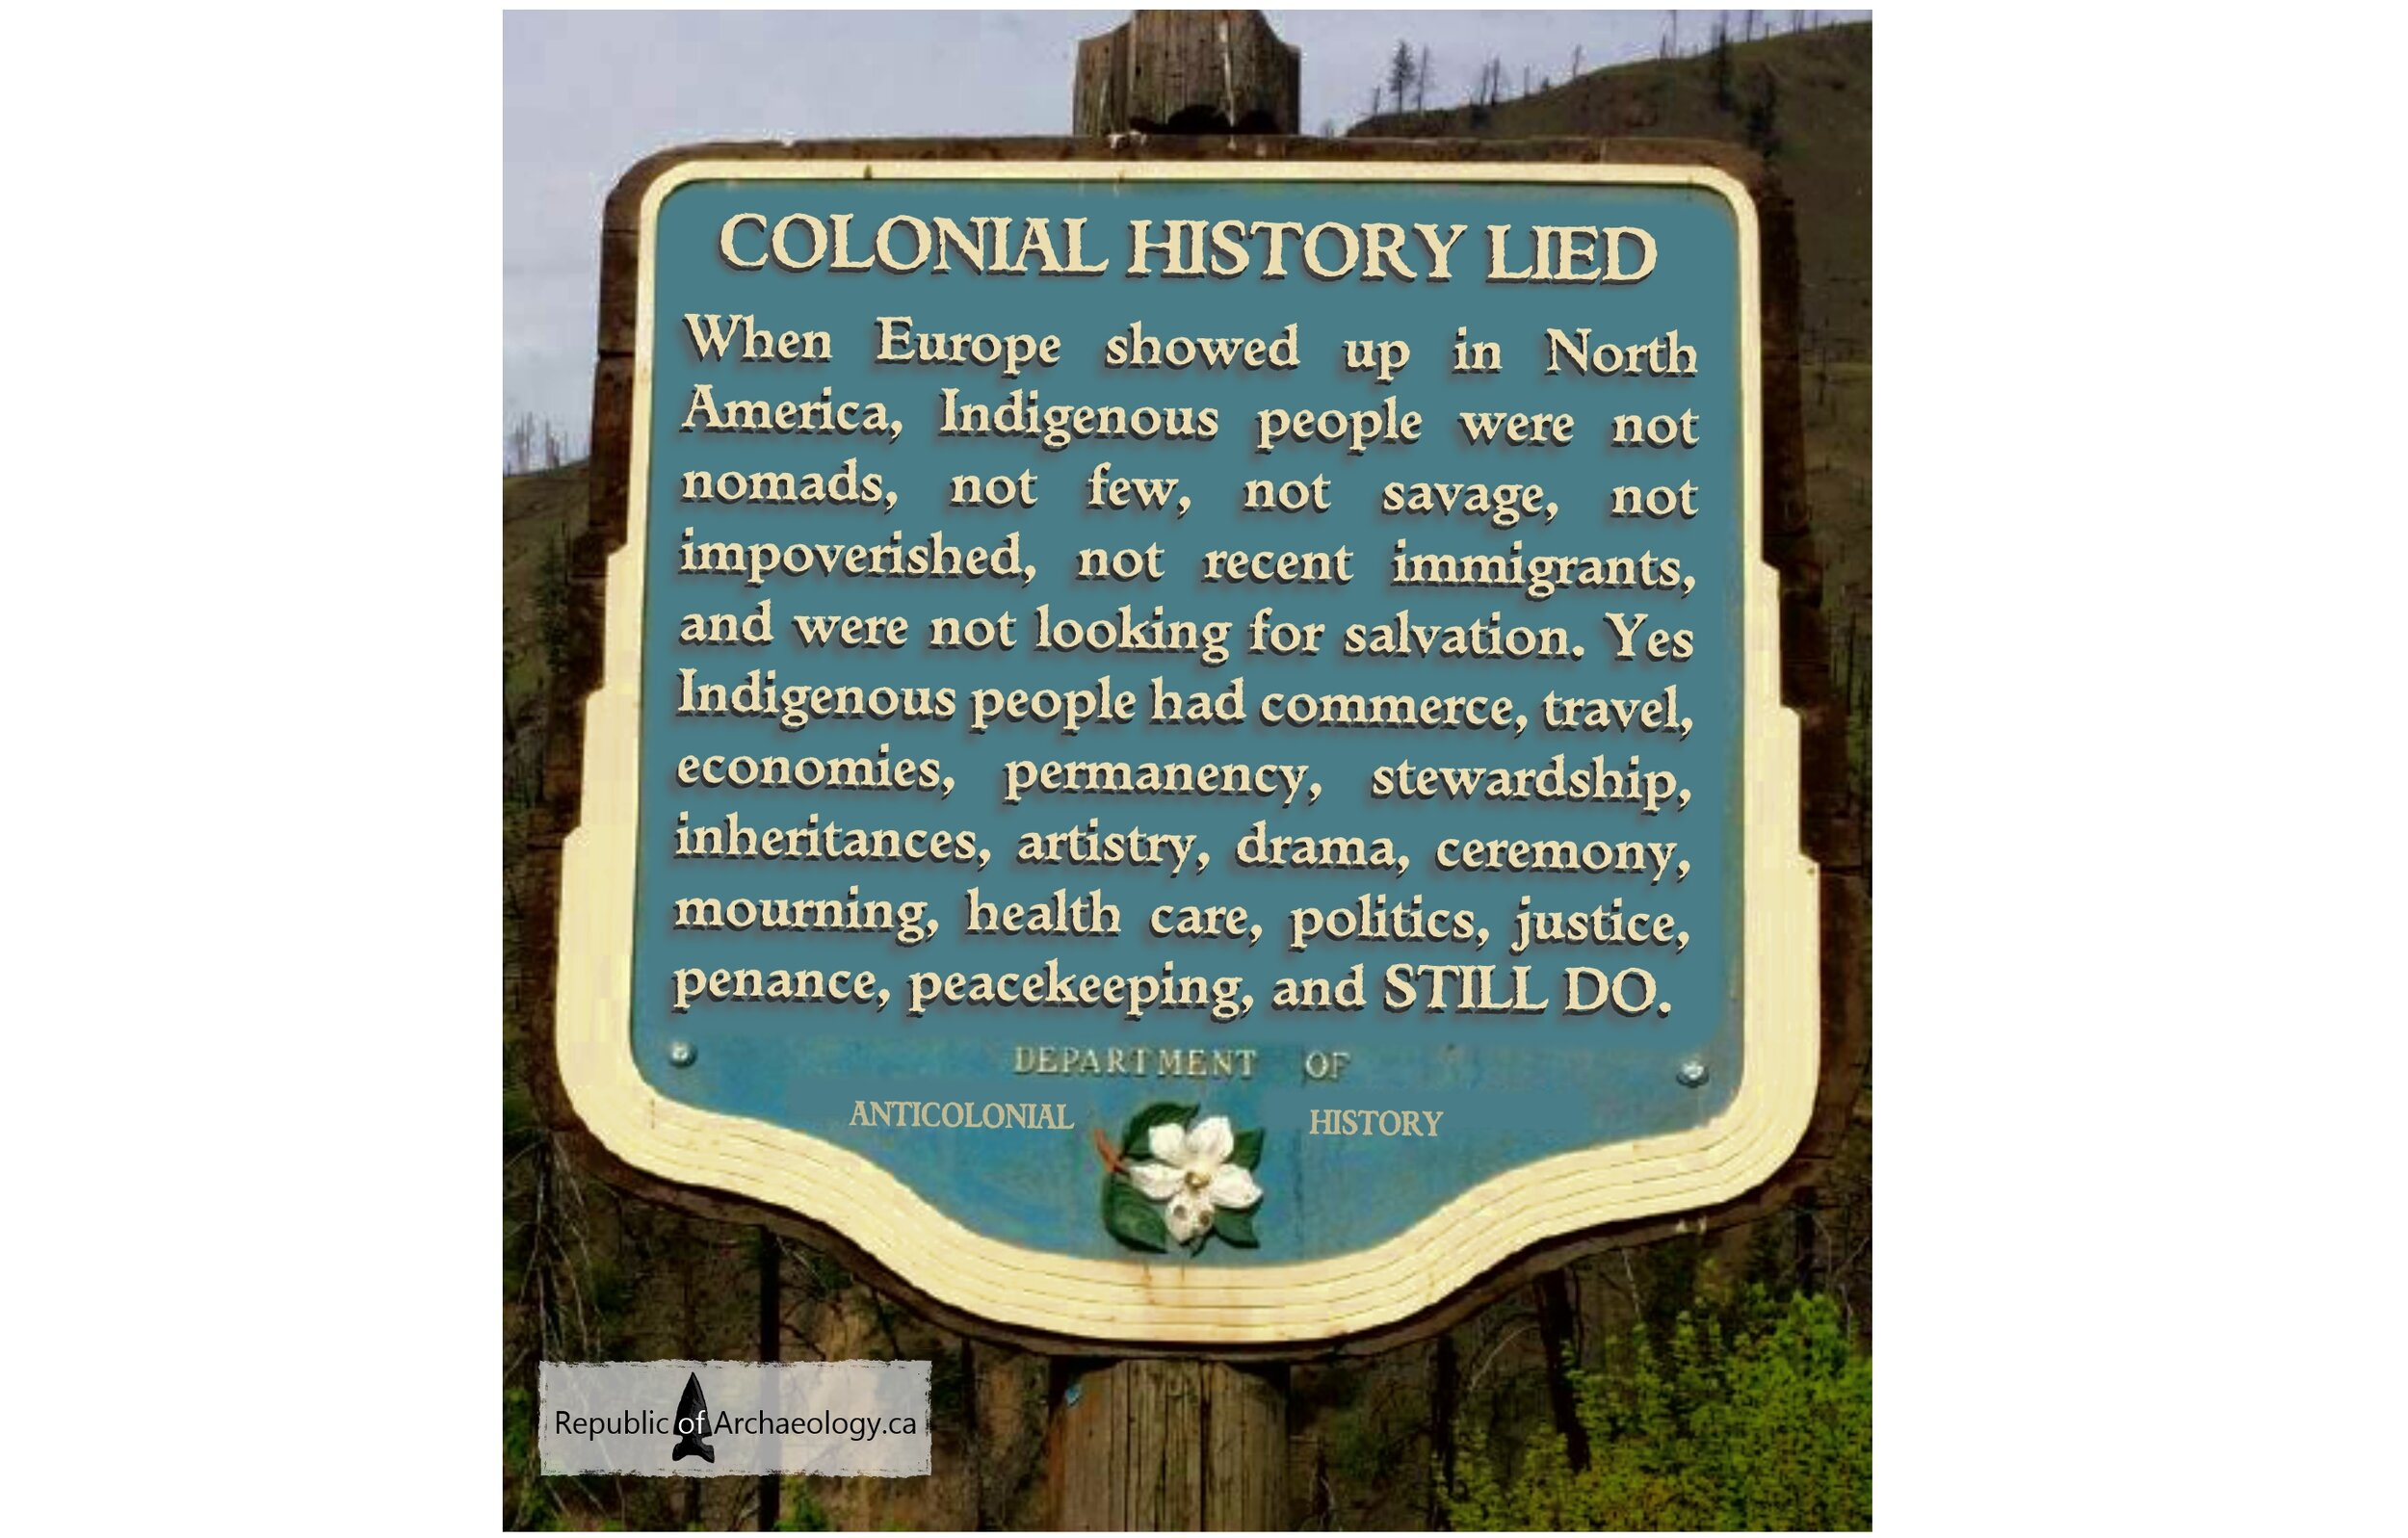 Colonial history lied_Republic of Archaeology